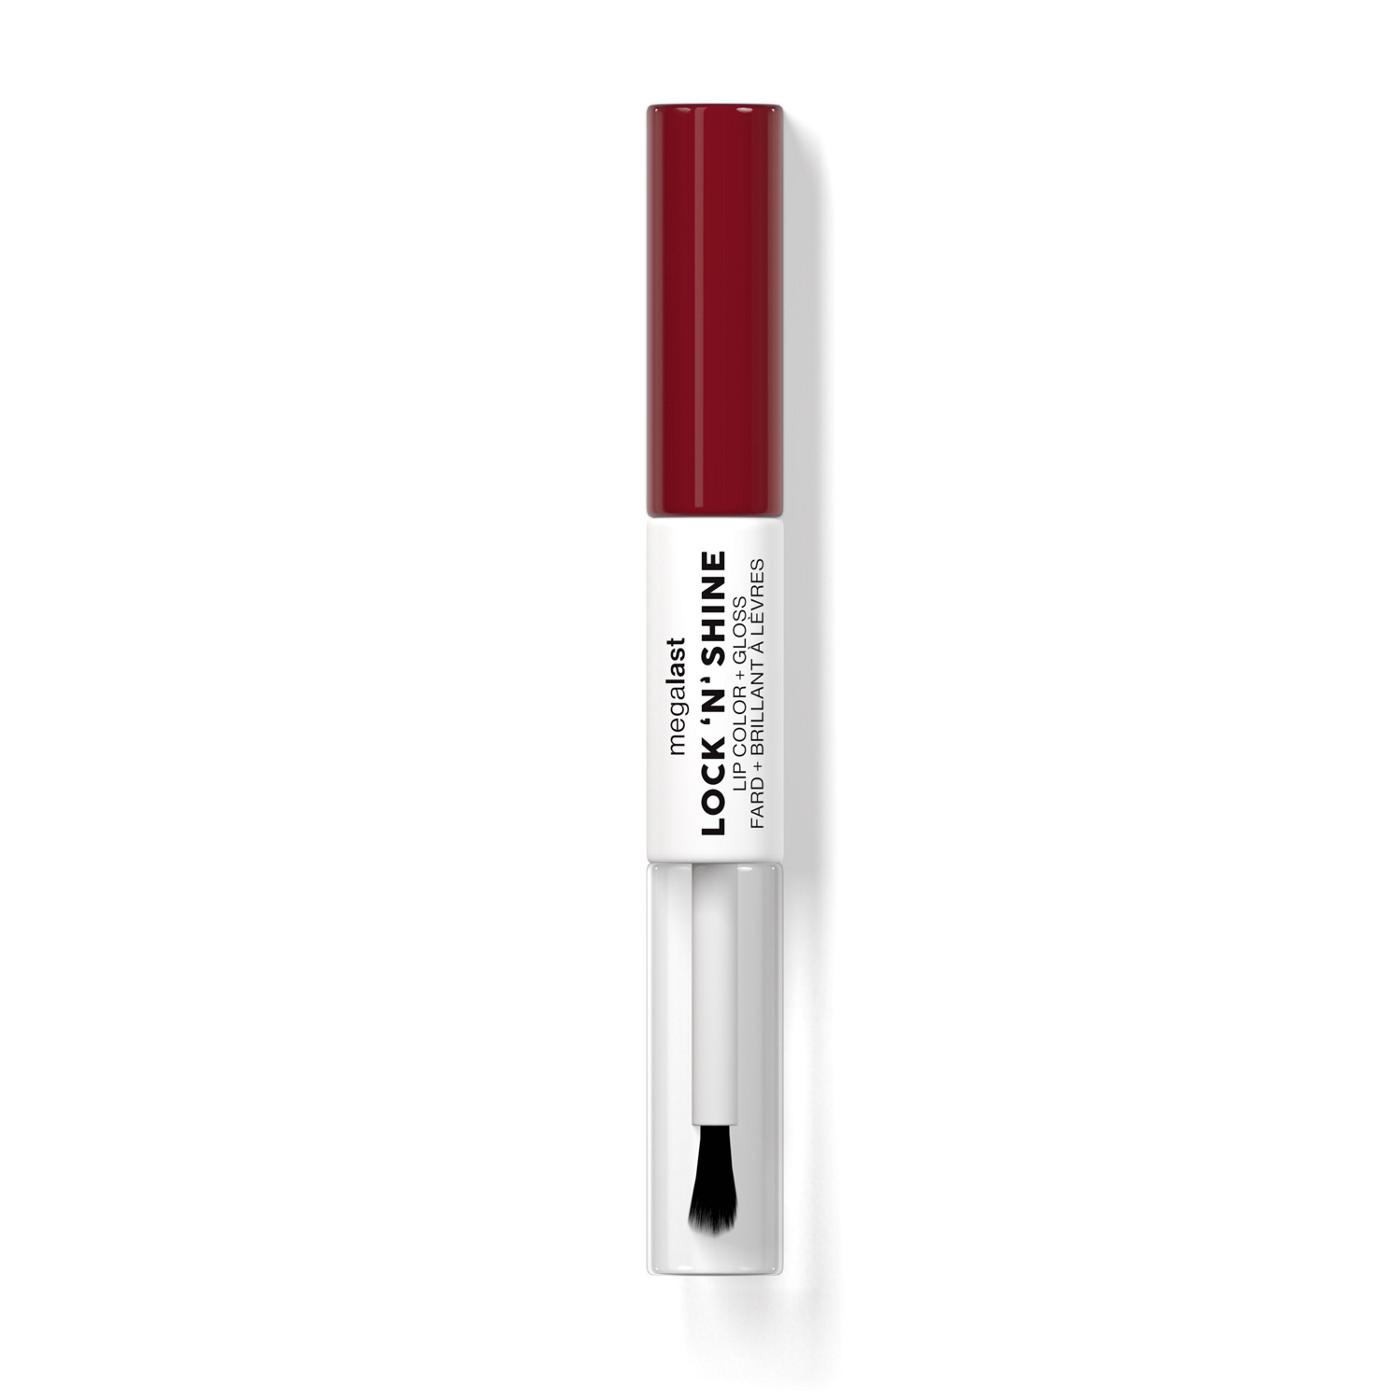 Wet n Wild MegaLast Lock N Shine Lip Gloss - Pout Energy; image 1 of 3